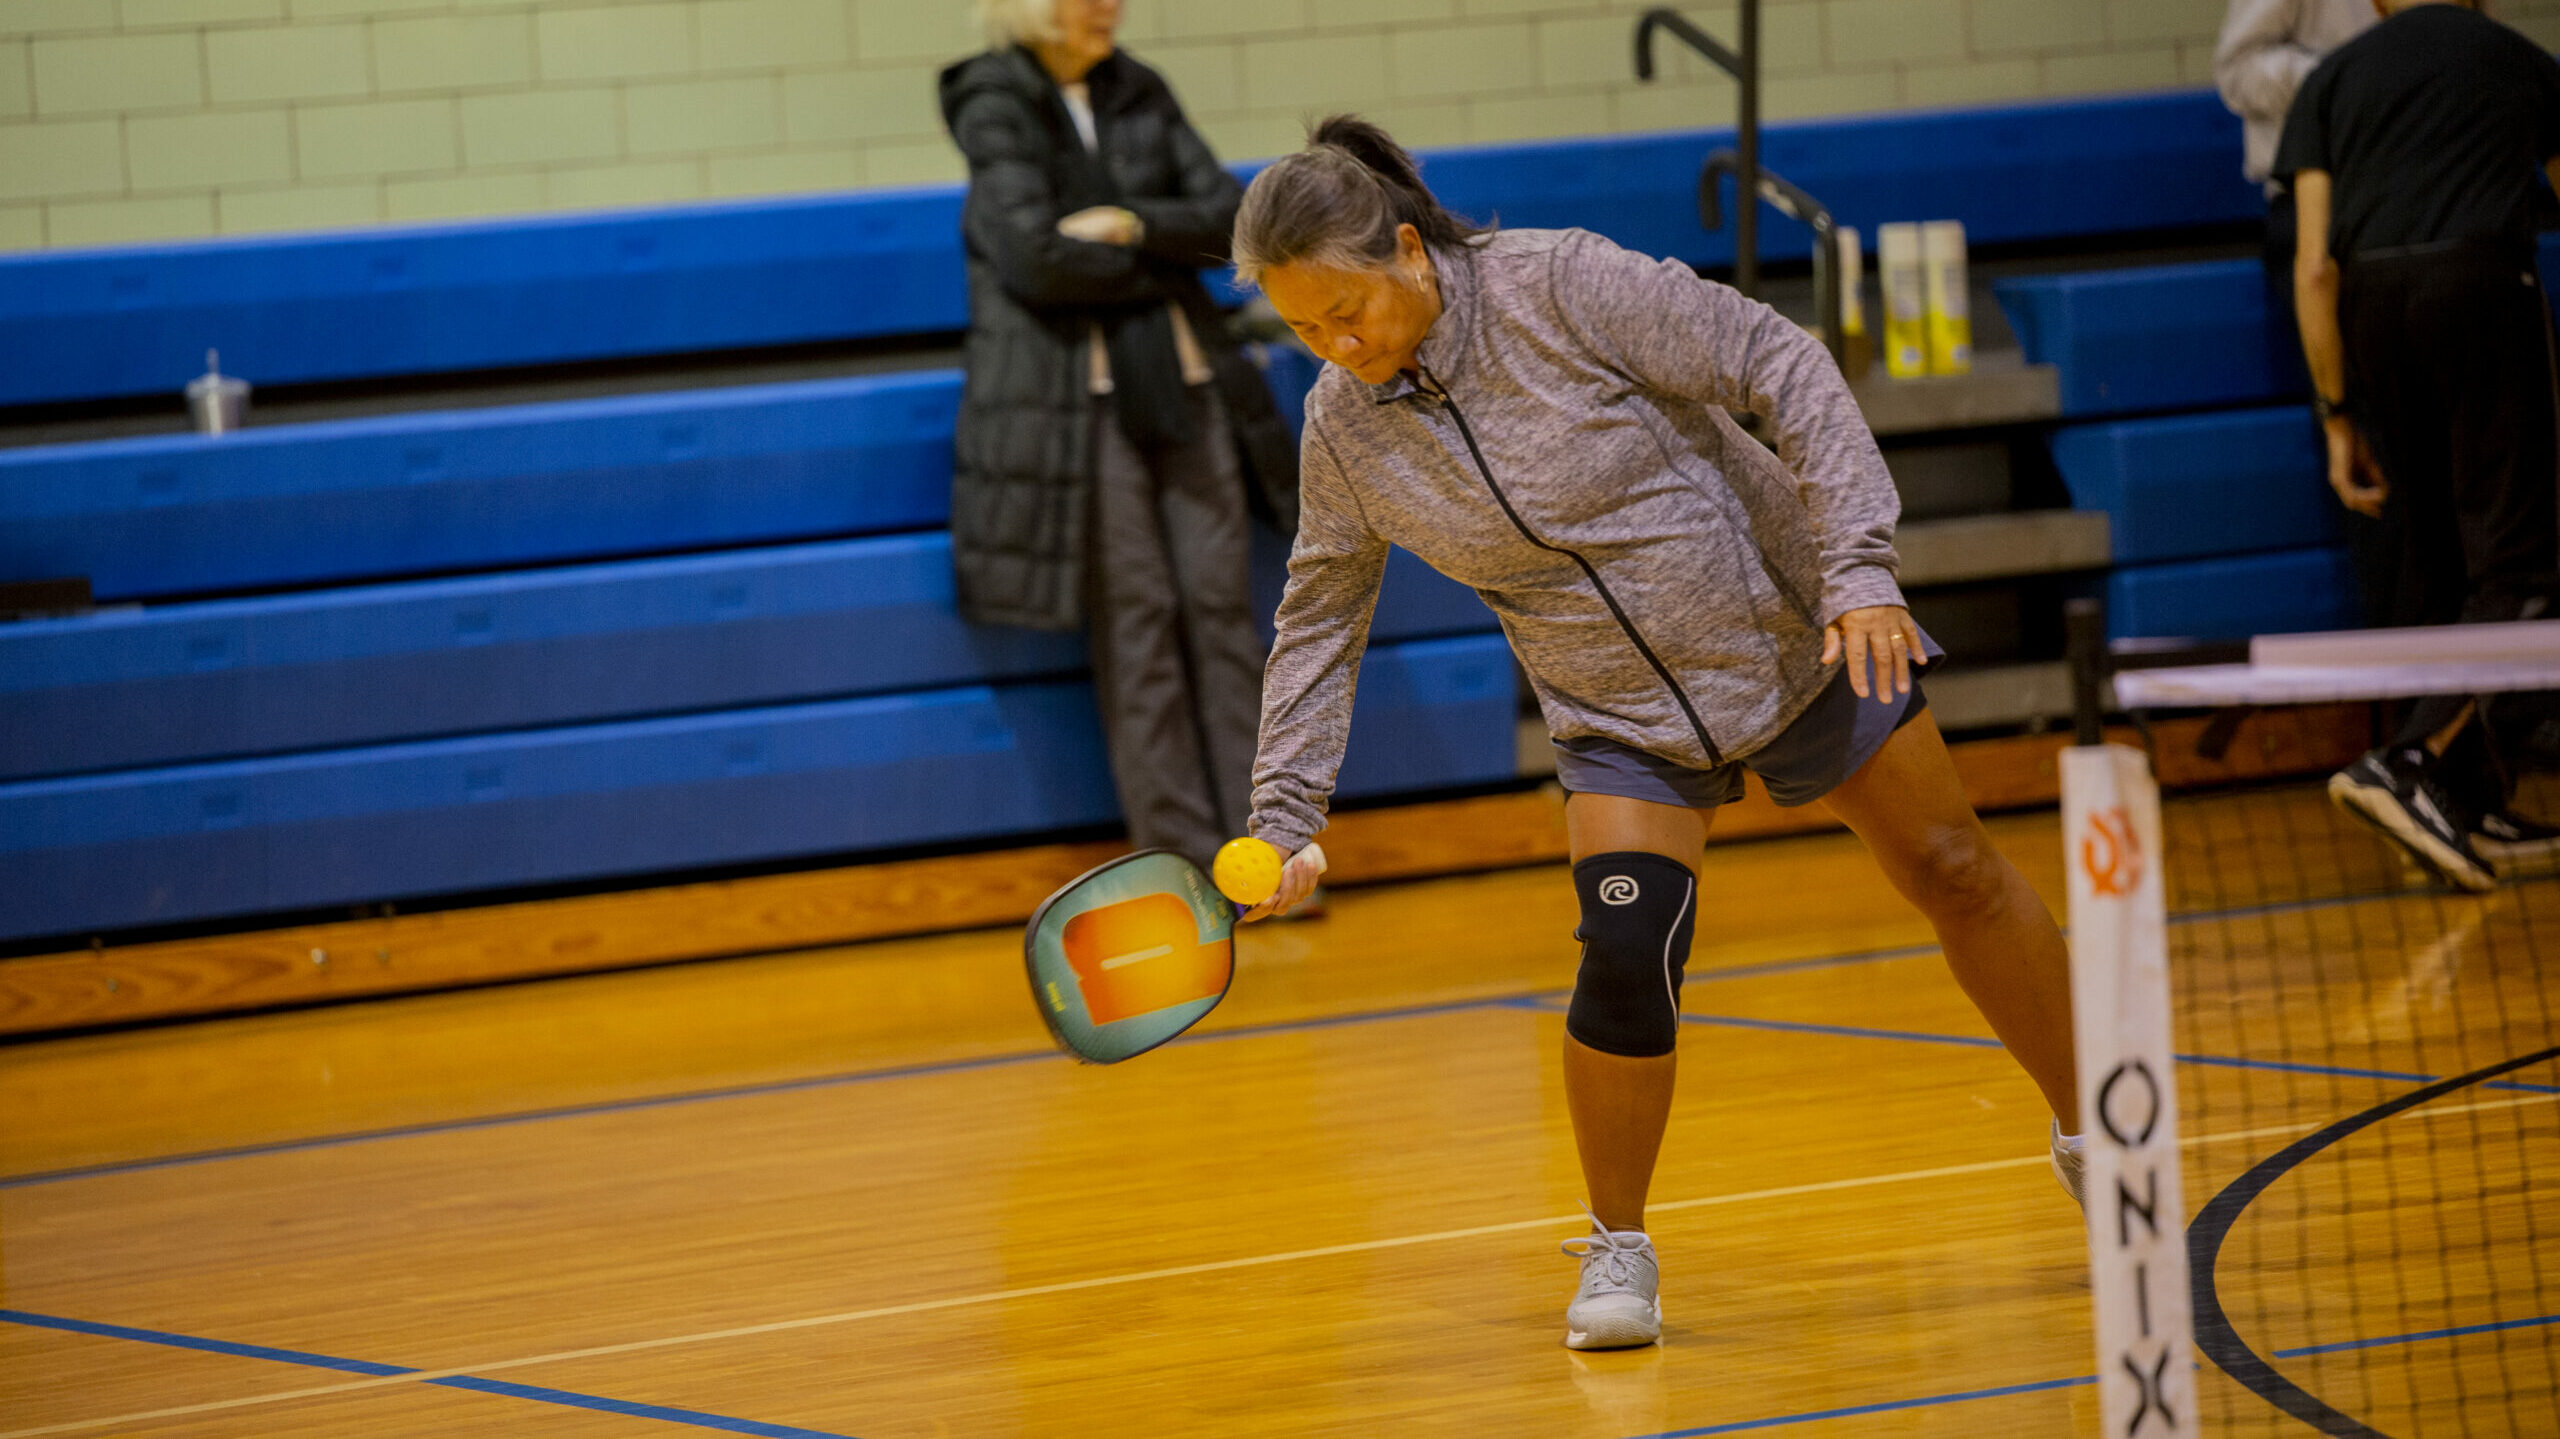 Woman in grey sweatshirt and shorts leaning down to hit the ball in a picklleball game.